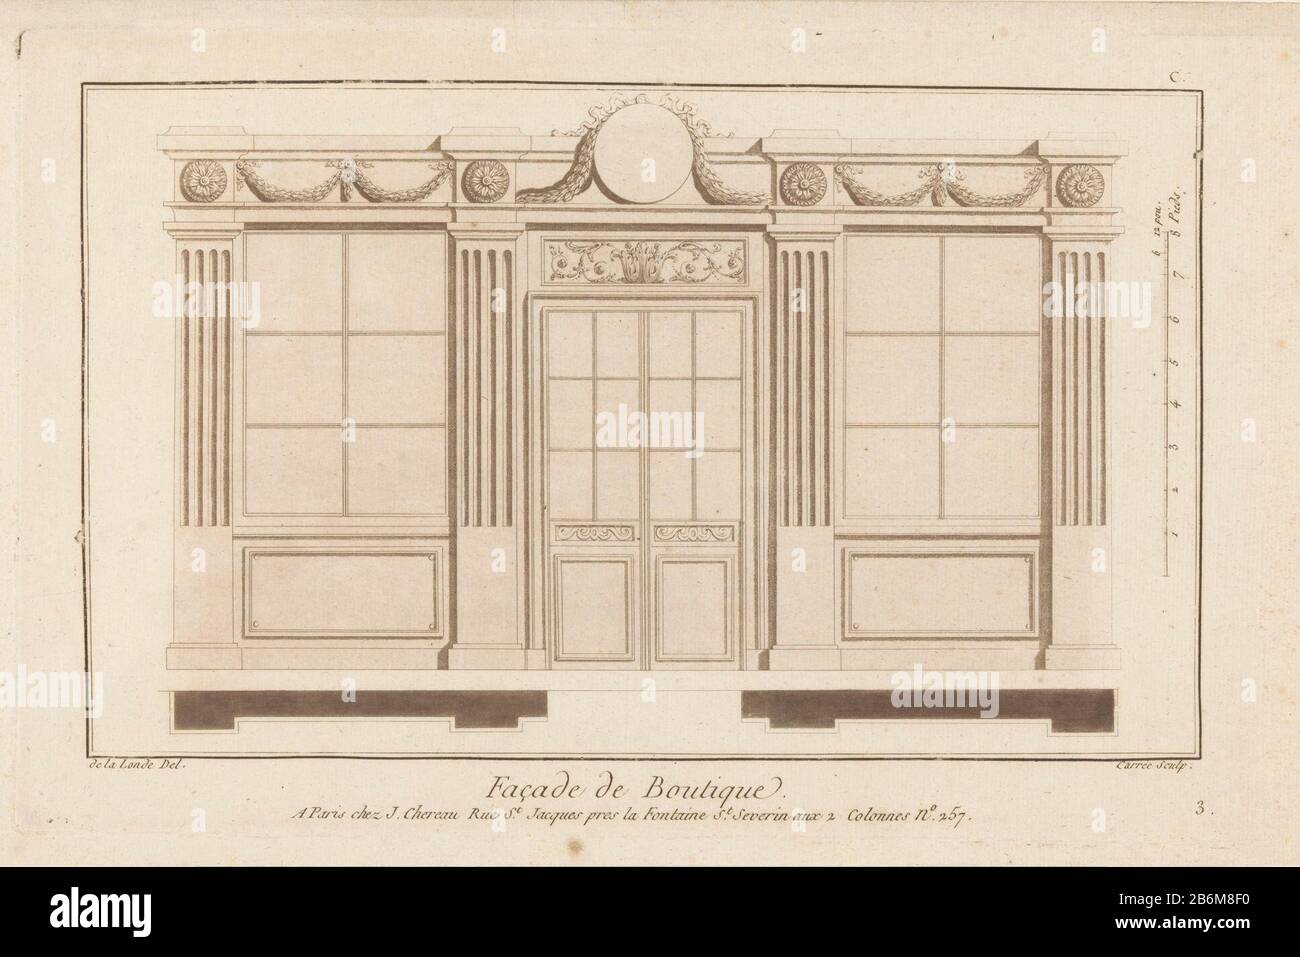 a façade with two doors in the middle with a dessus de porte with braid. On either side windows flanked by pilasters. On the upper side floral motifs, garlands and in the middle a round medaillon. Manufacturer : print maker: Antoine Carrée (indicated on object) to drawing of: Richard the Lalonde (indicated on object) Editor: Jacques Simon Chéreau (indicated on object) Place manufacture: Paris Date: 1788 Physical characteristics: etching and aqua tint, printed in brown material: paper Technique: etching / aquatint dimensions: plate edge: h 220 mm × W 343 mm Subject: façade (or house or building Stock Photo